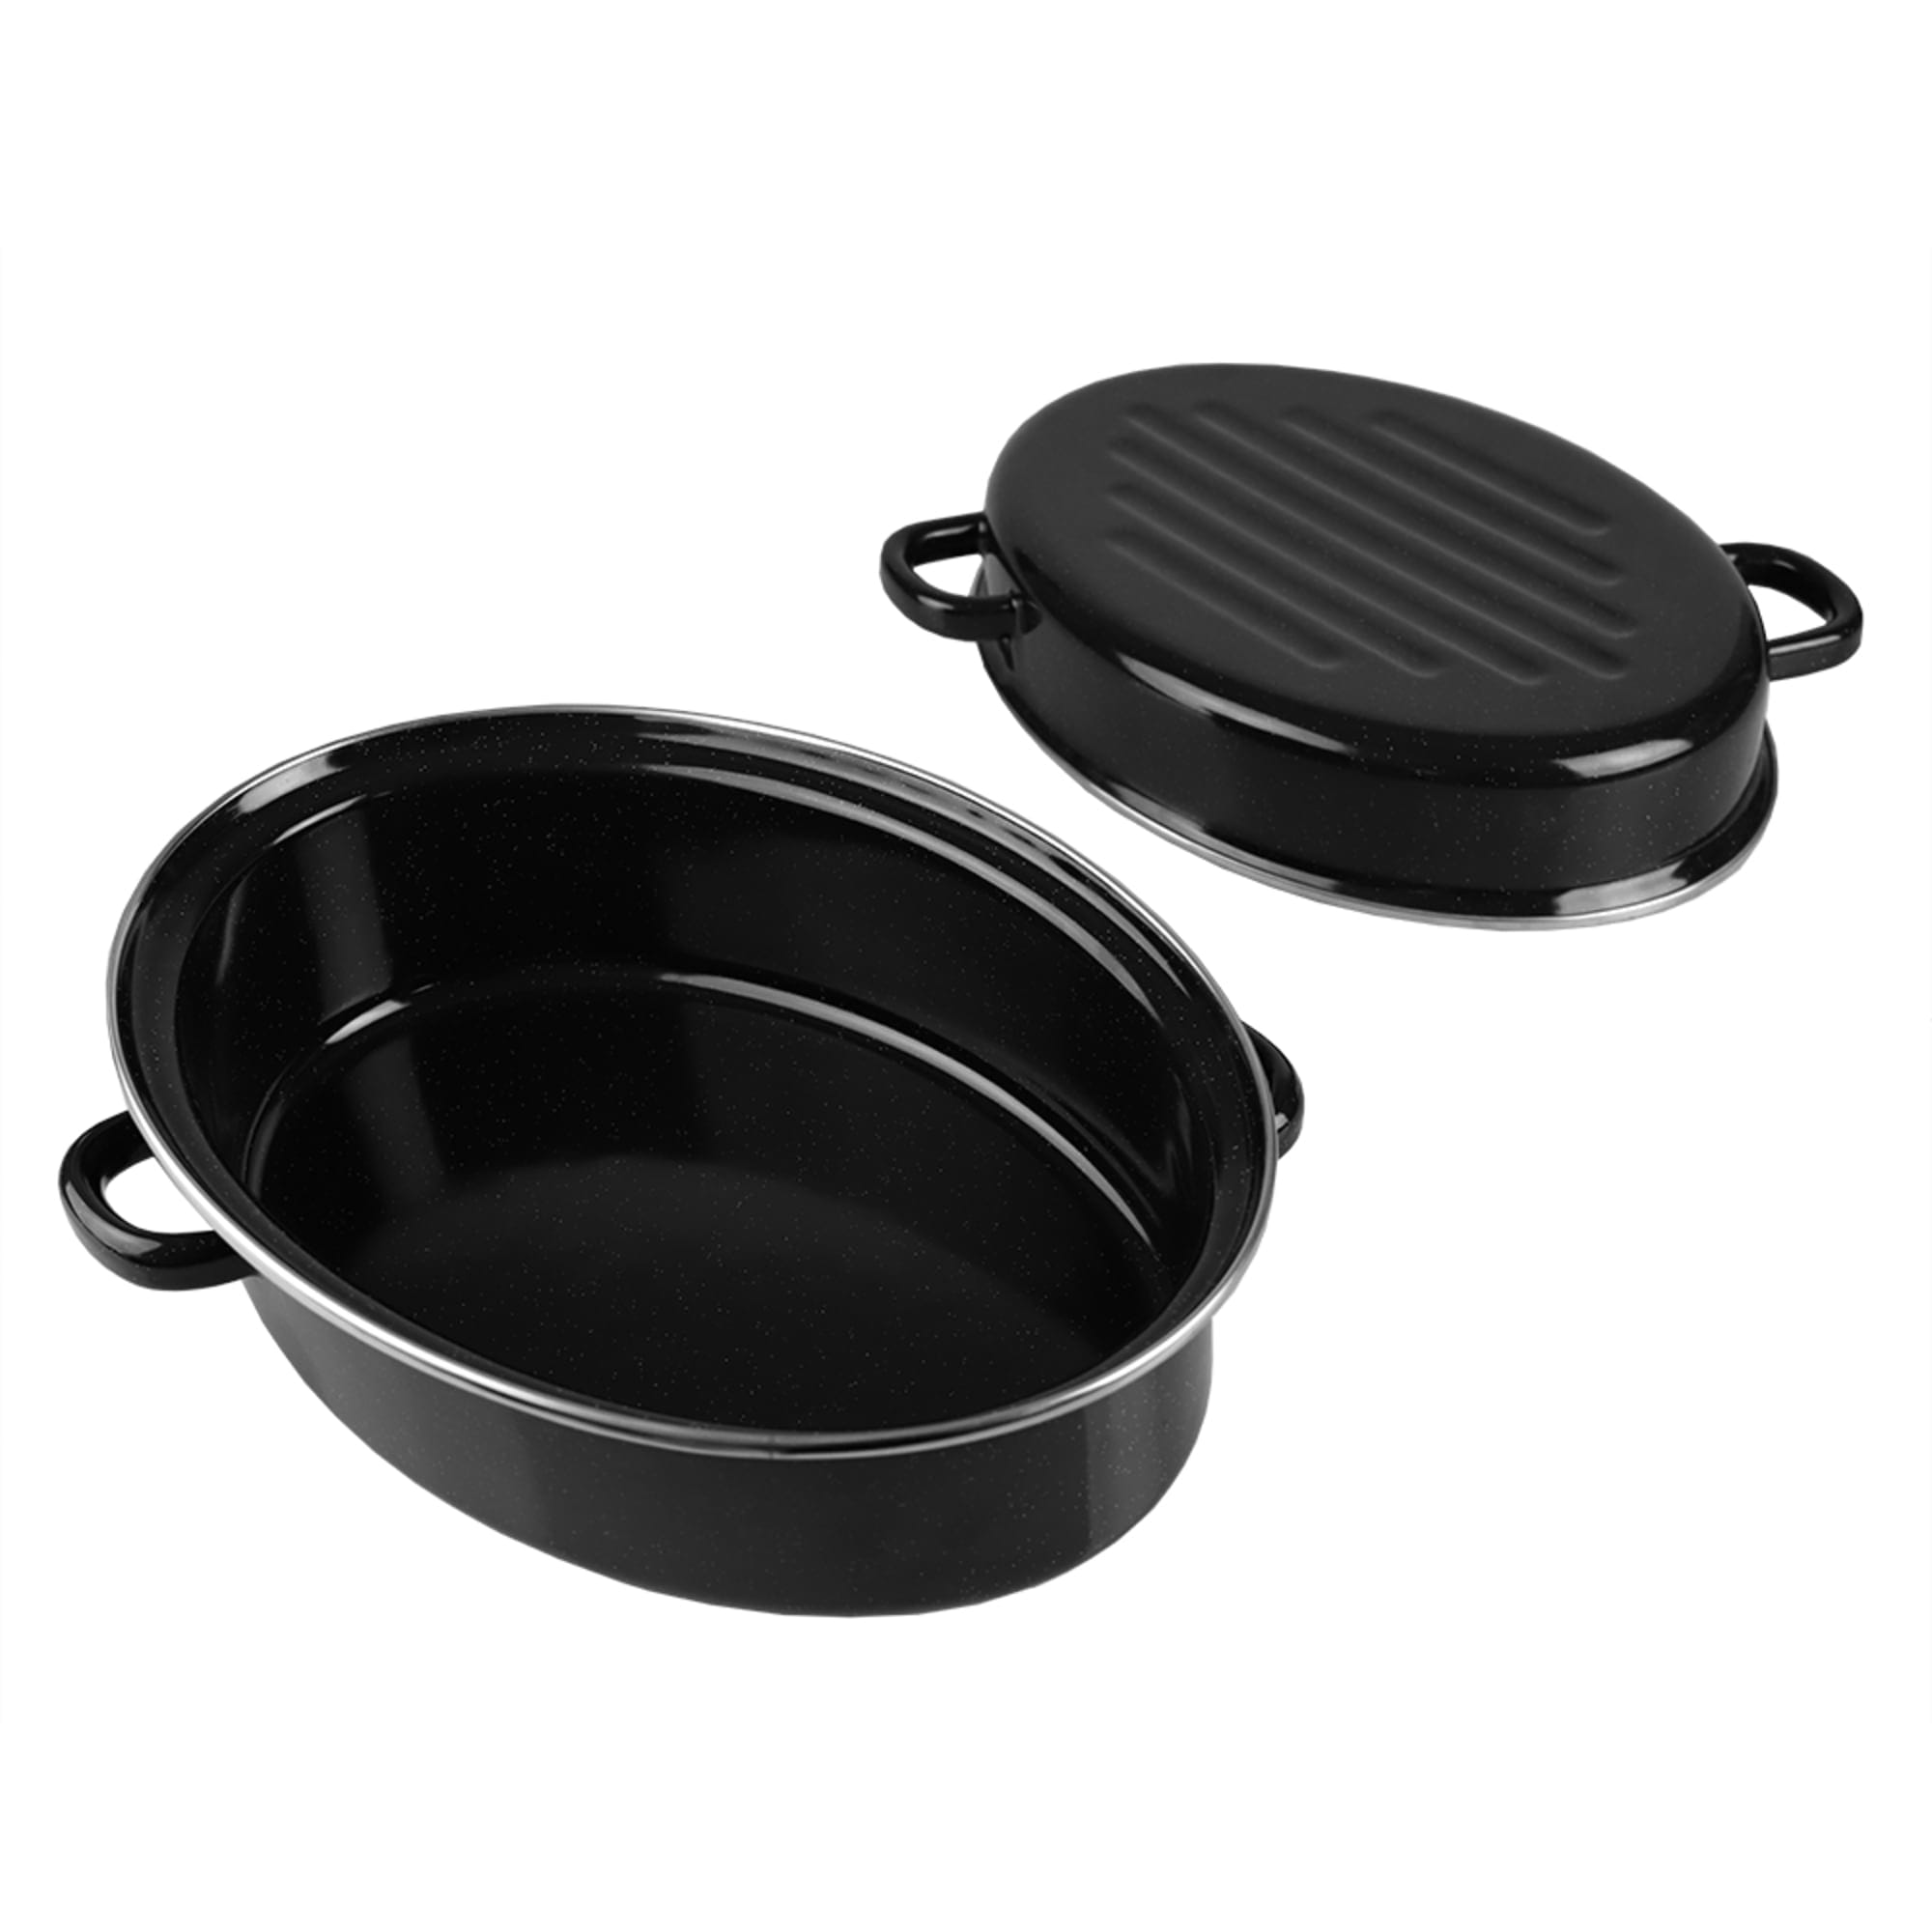 Home Basics Deep Oval Natural Non-Stick 12” Enameled Carbon Steel Roaster Pan with Lid, Black $20.00 EACH, CASE PACK OF 4